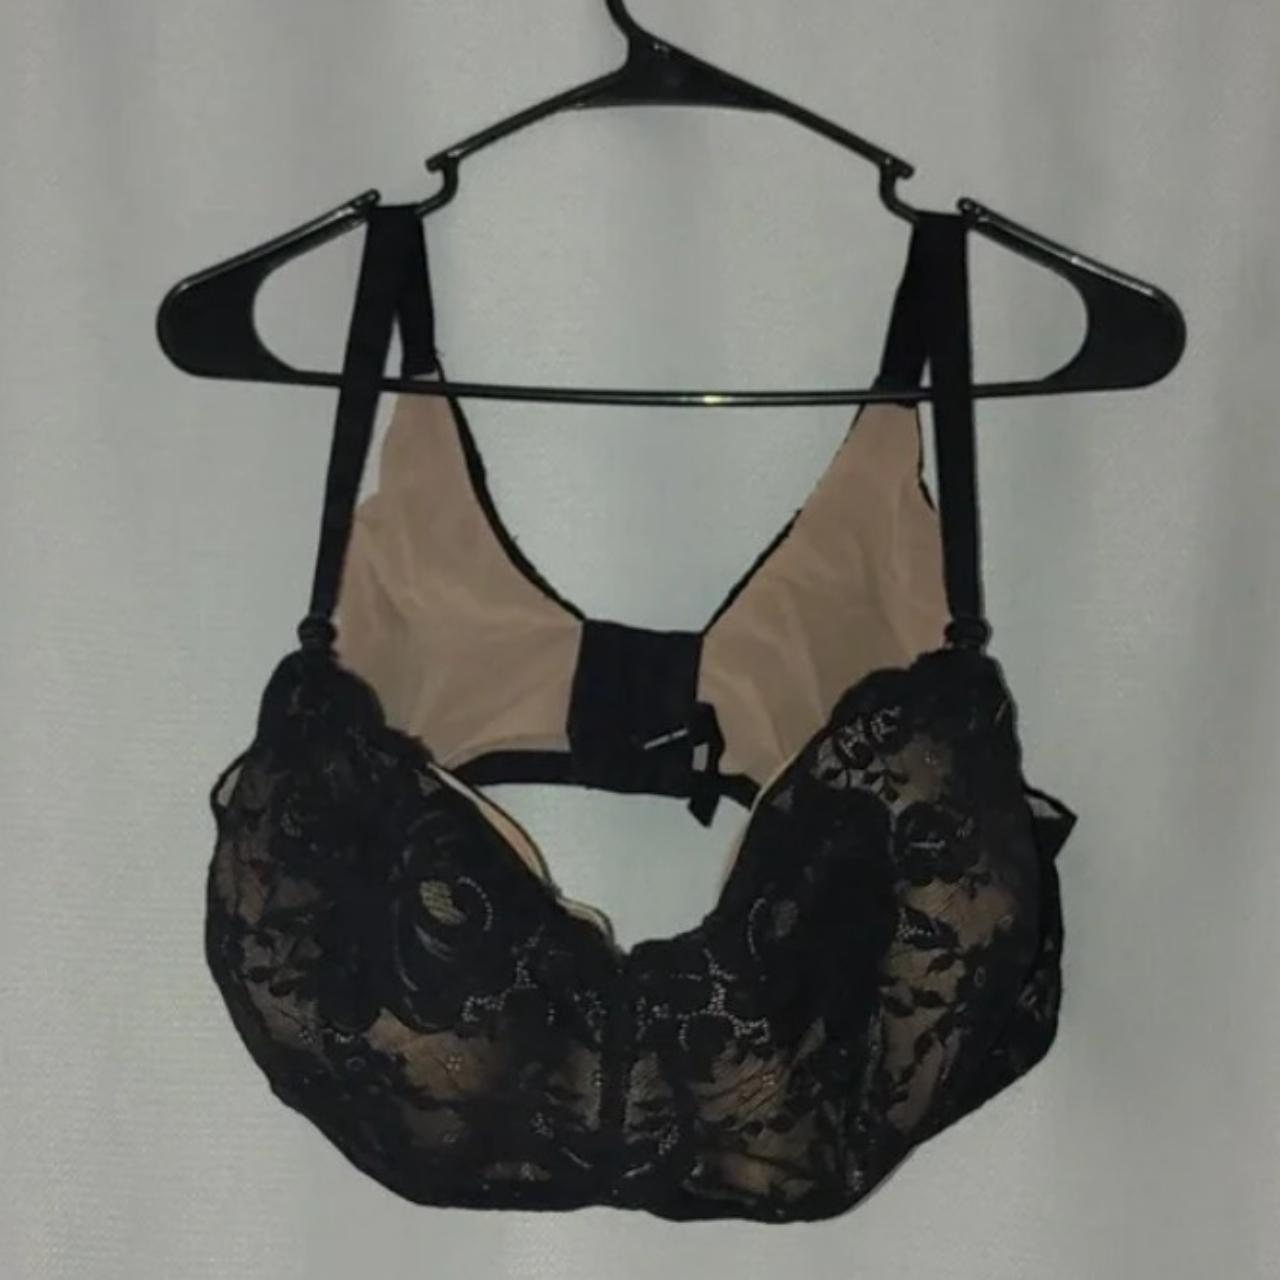 Torrid BNWT 42DD lace bra Size undefined - $35 New With Tags